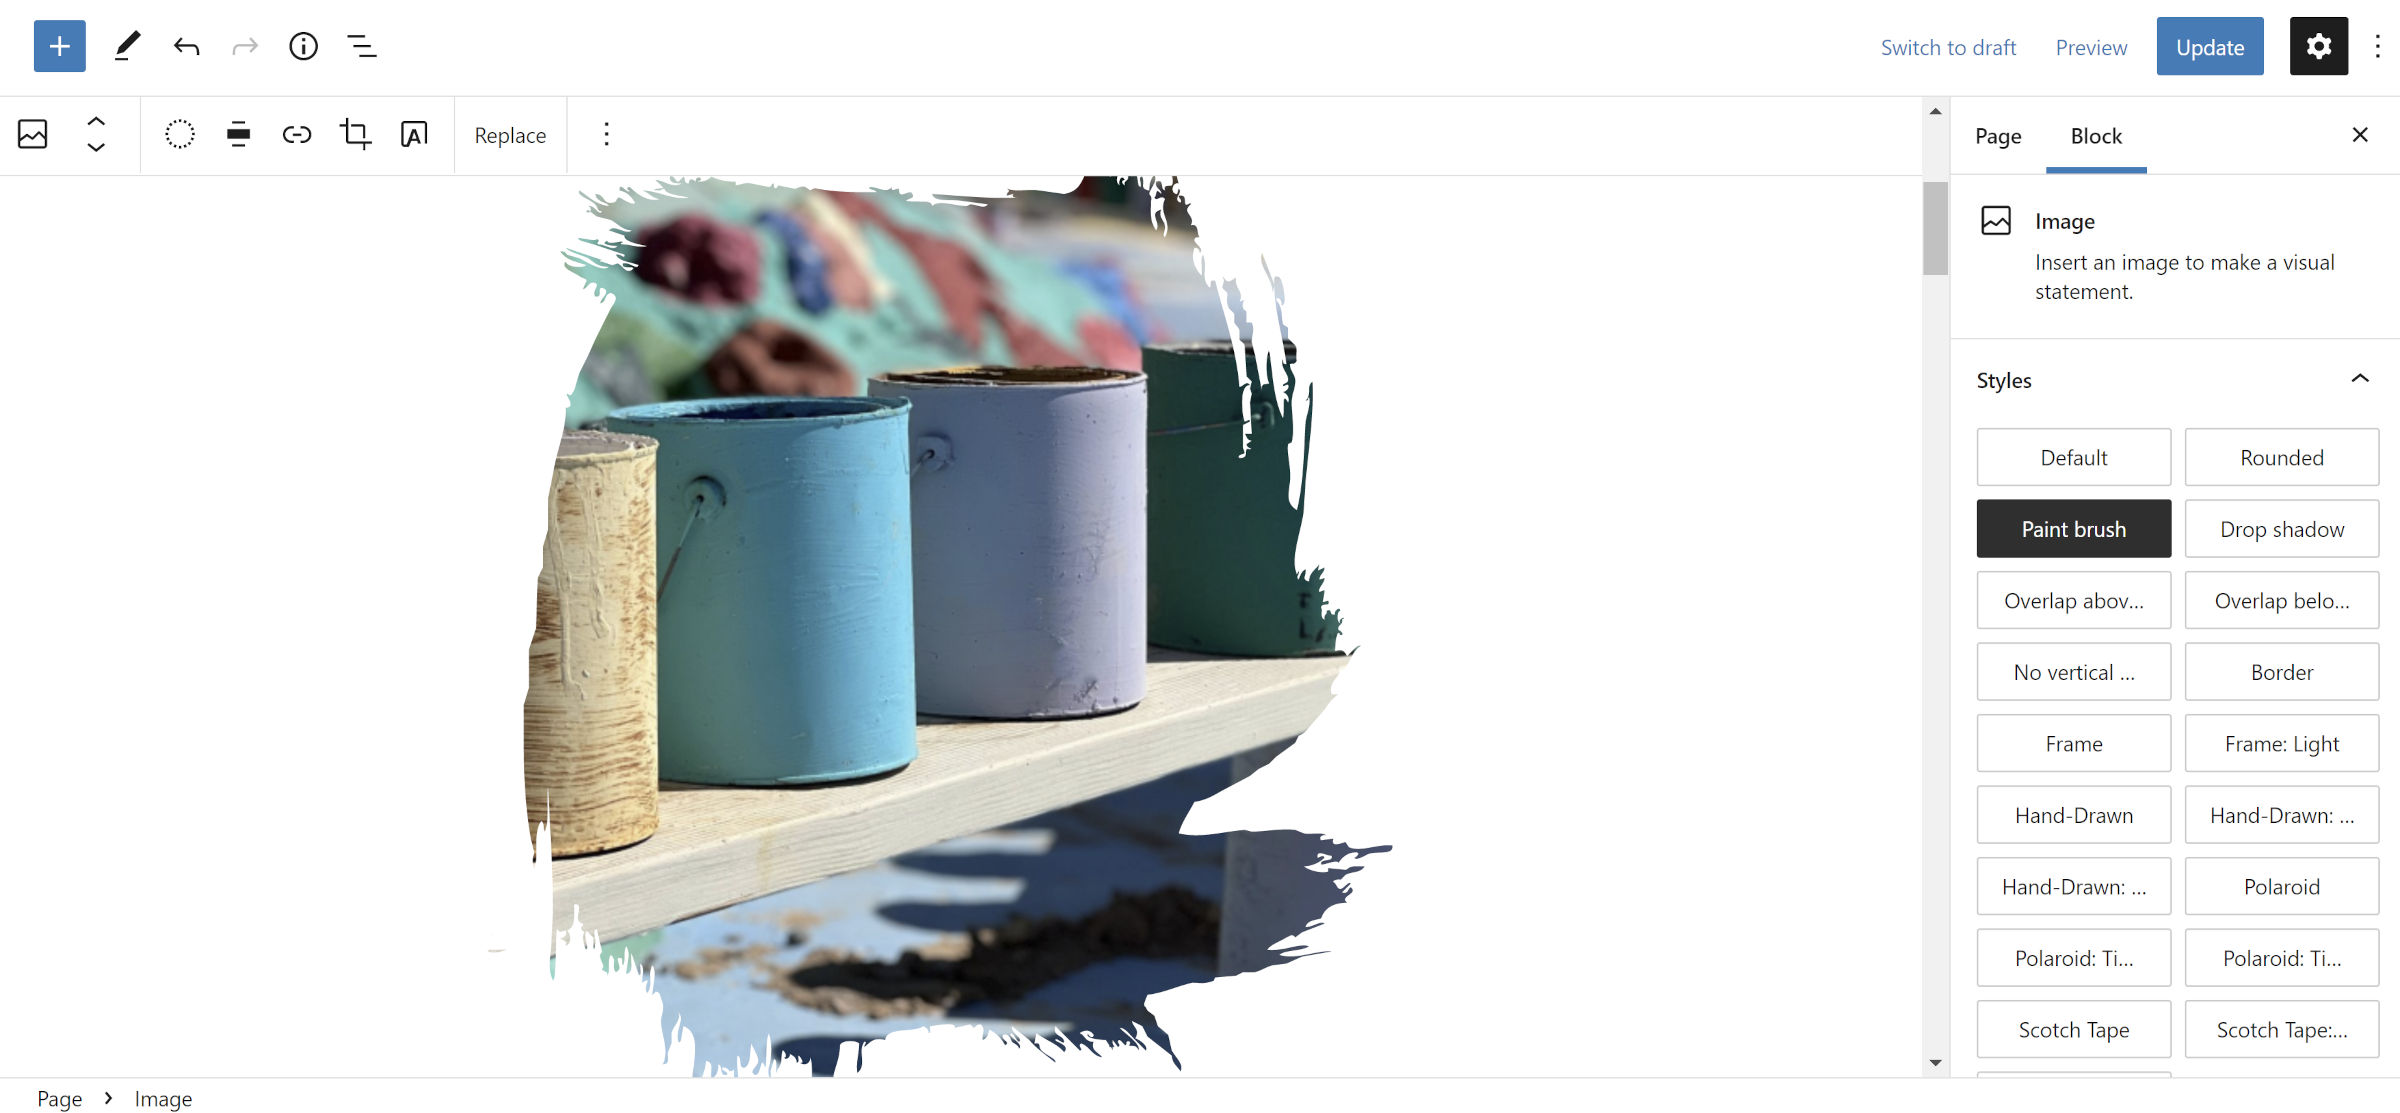 Photo of paint cans with an cutout outline in the shape of brush strokes.